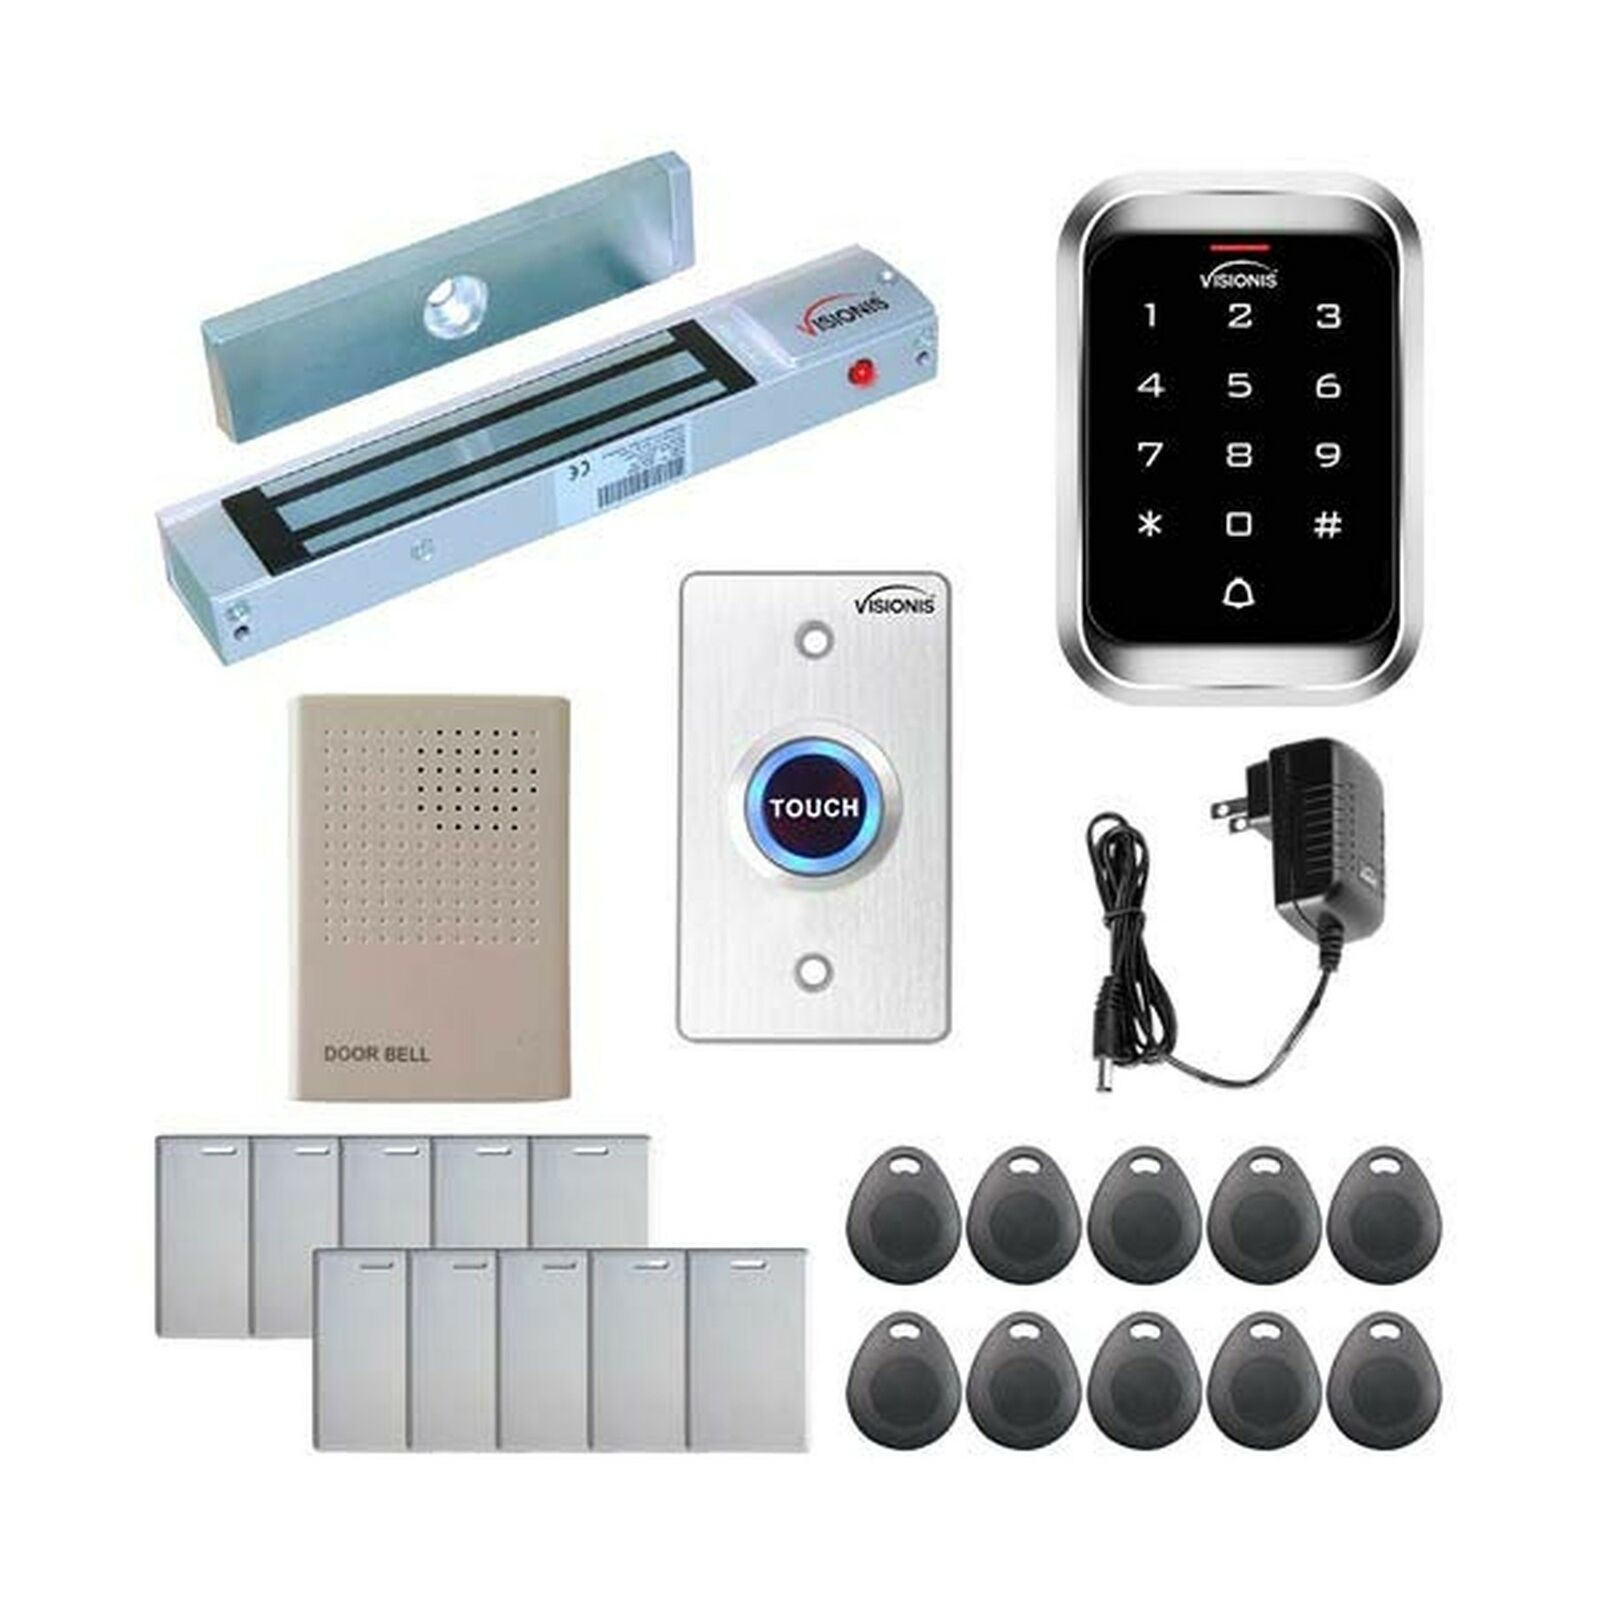 Visionis Fpc-5098 One Door Access Control System Outswing Door 300lbs Magneti...